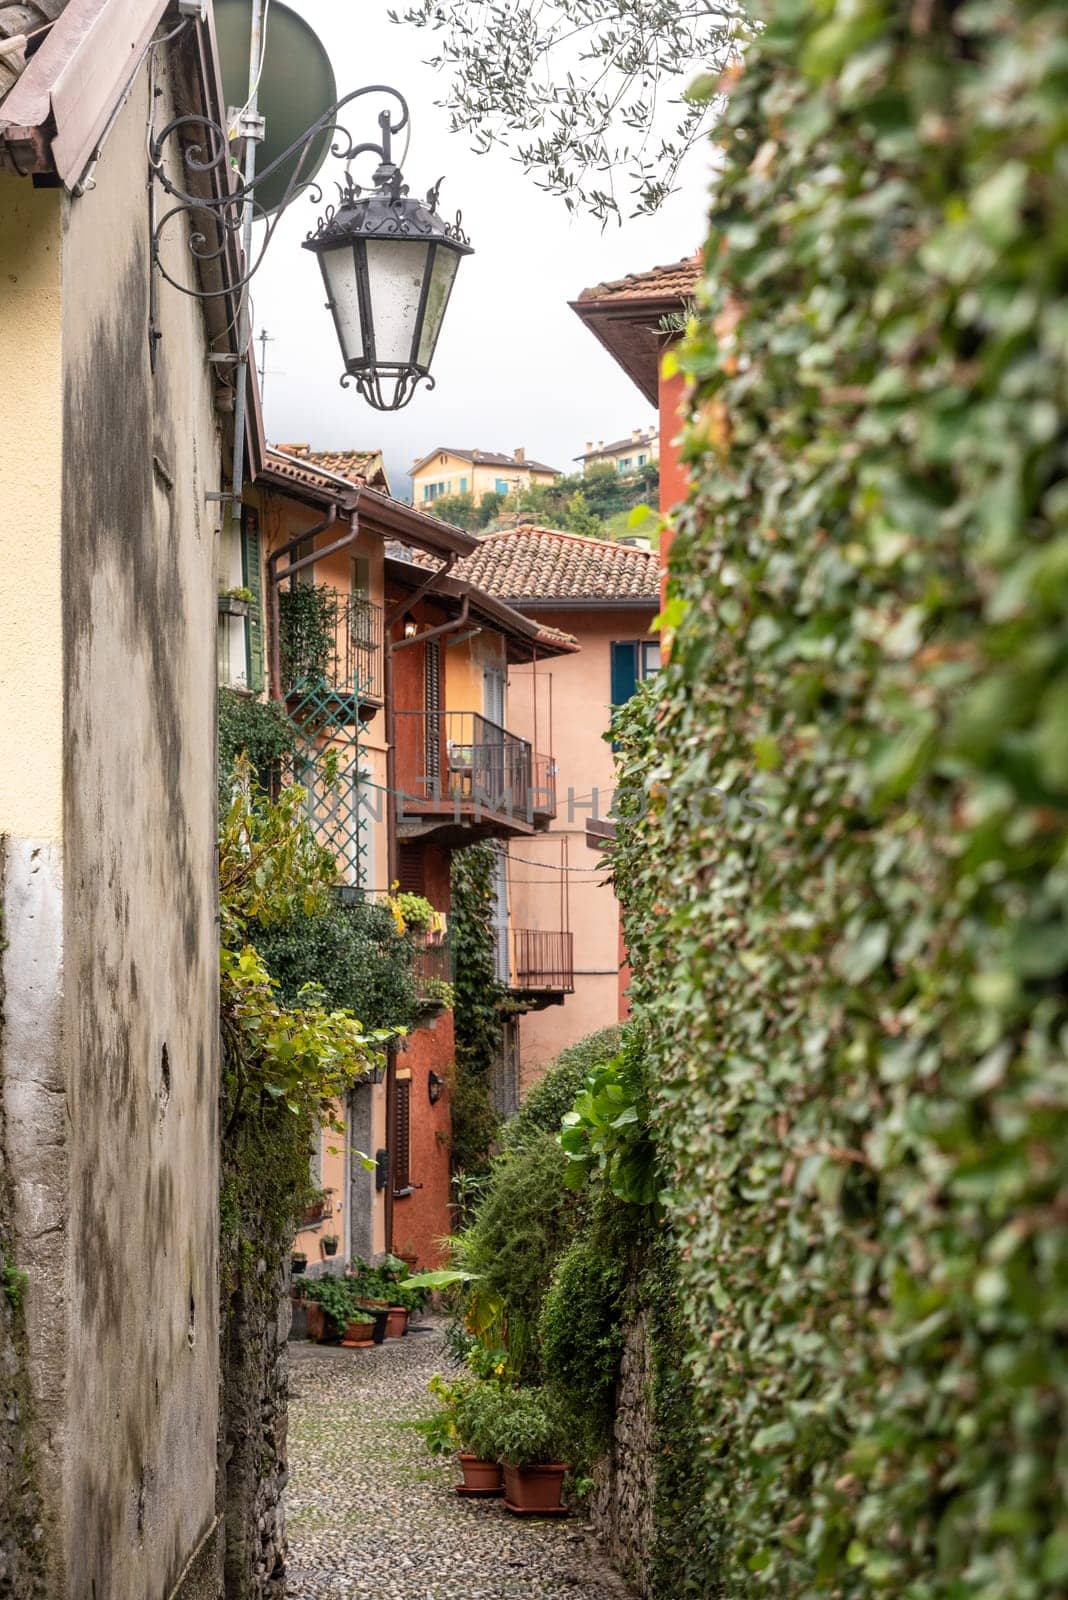 Enchanted alleyway in the scenic town of Bellagio at lake Como by imagoDens